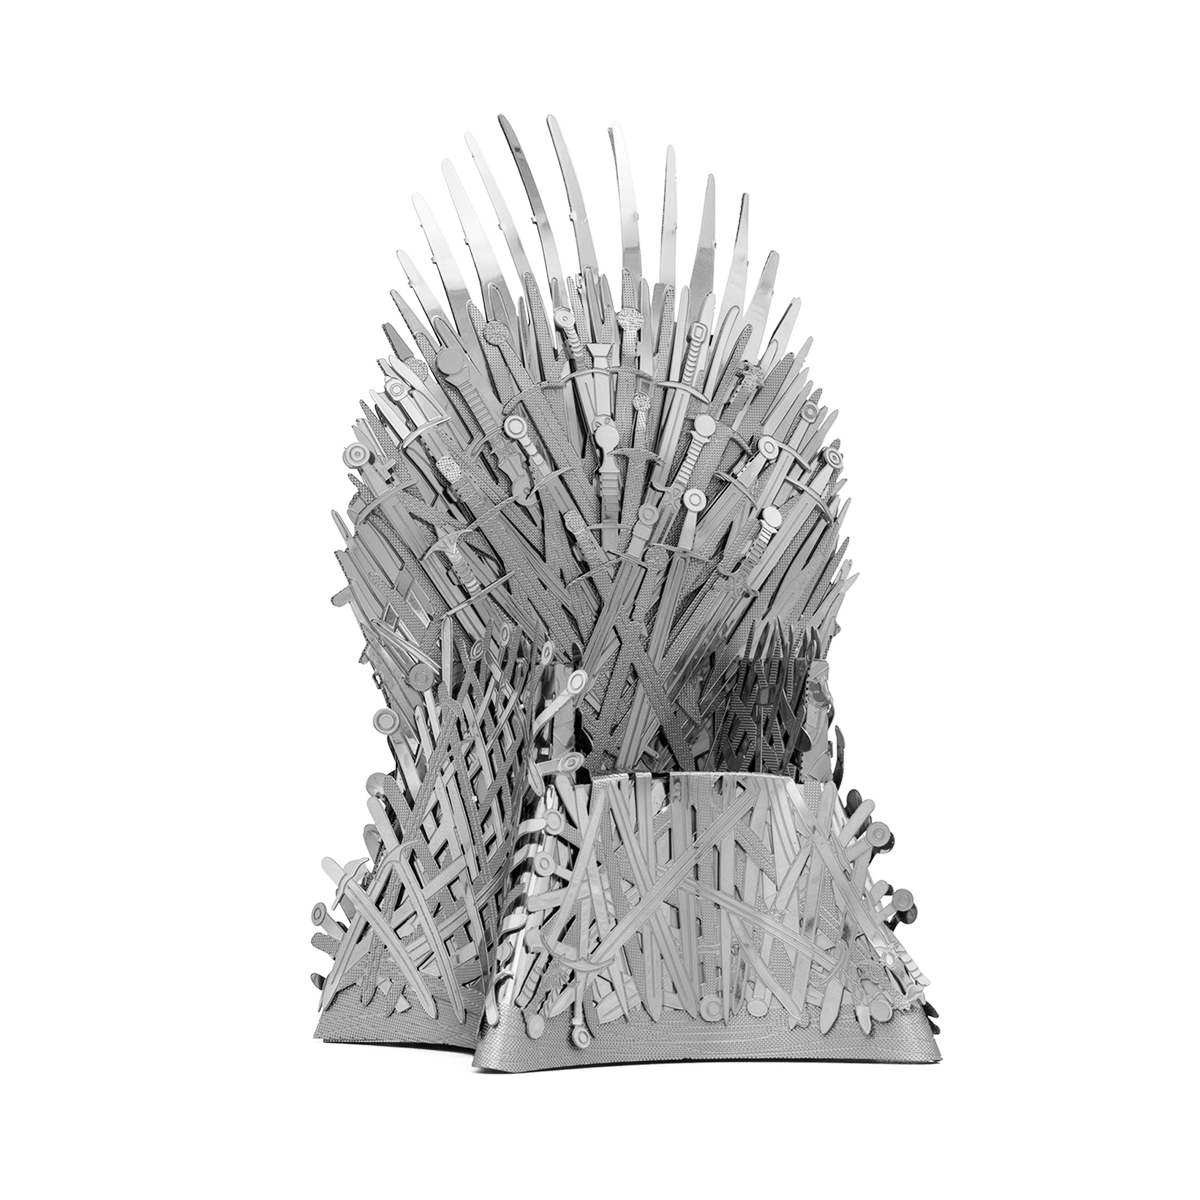 Metal Earth ICONX Game of Thrones IRON THRONE 3D Steel DIY Model Building Kit 